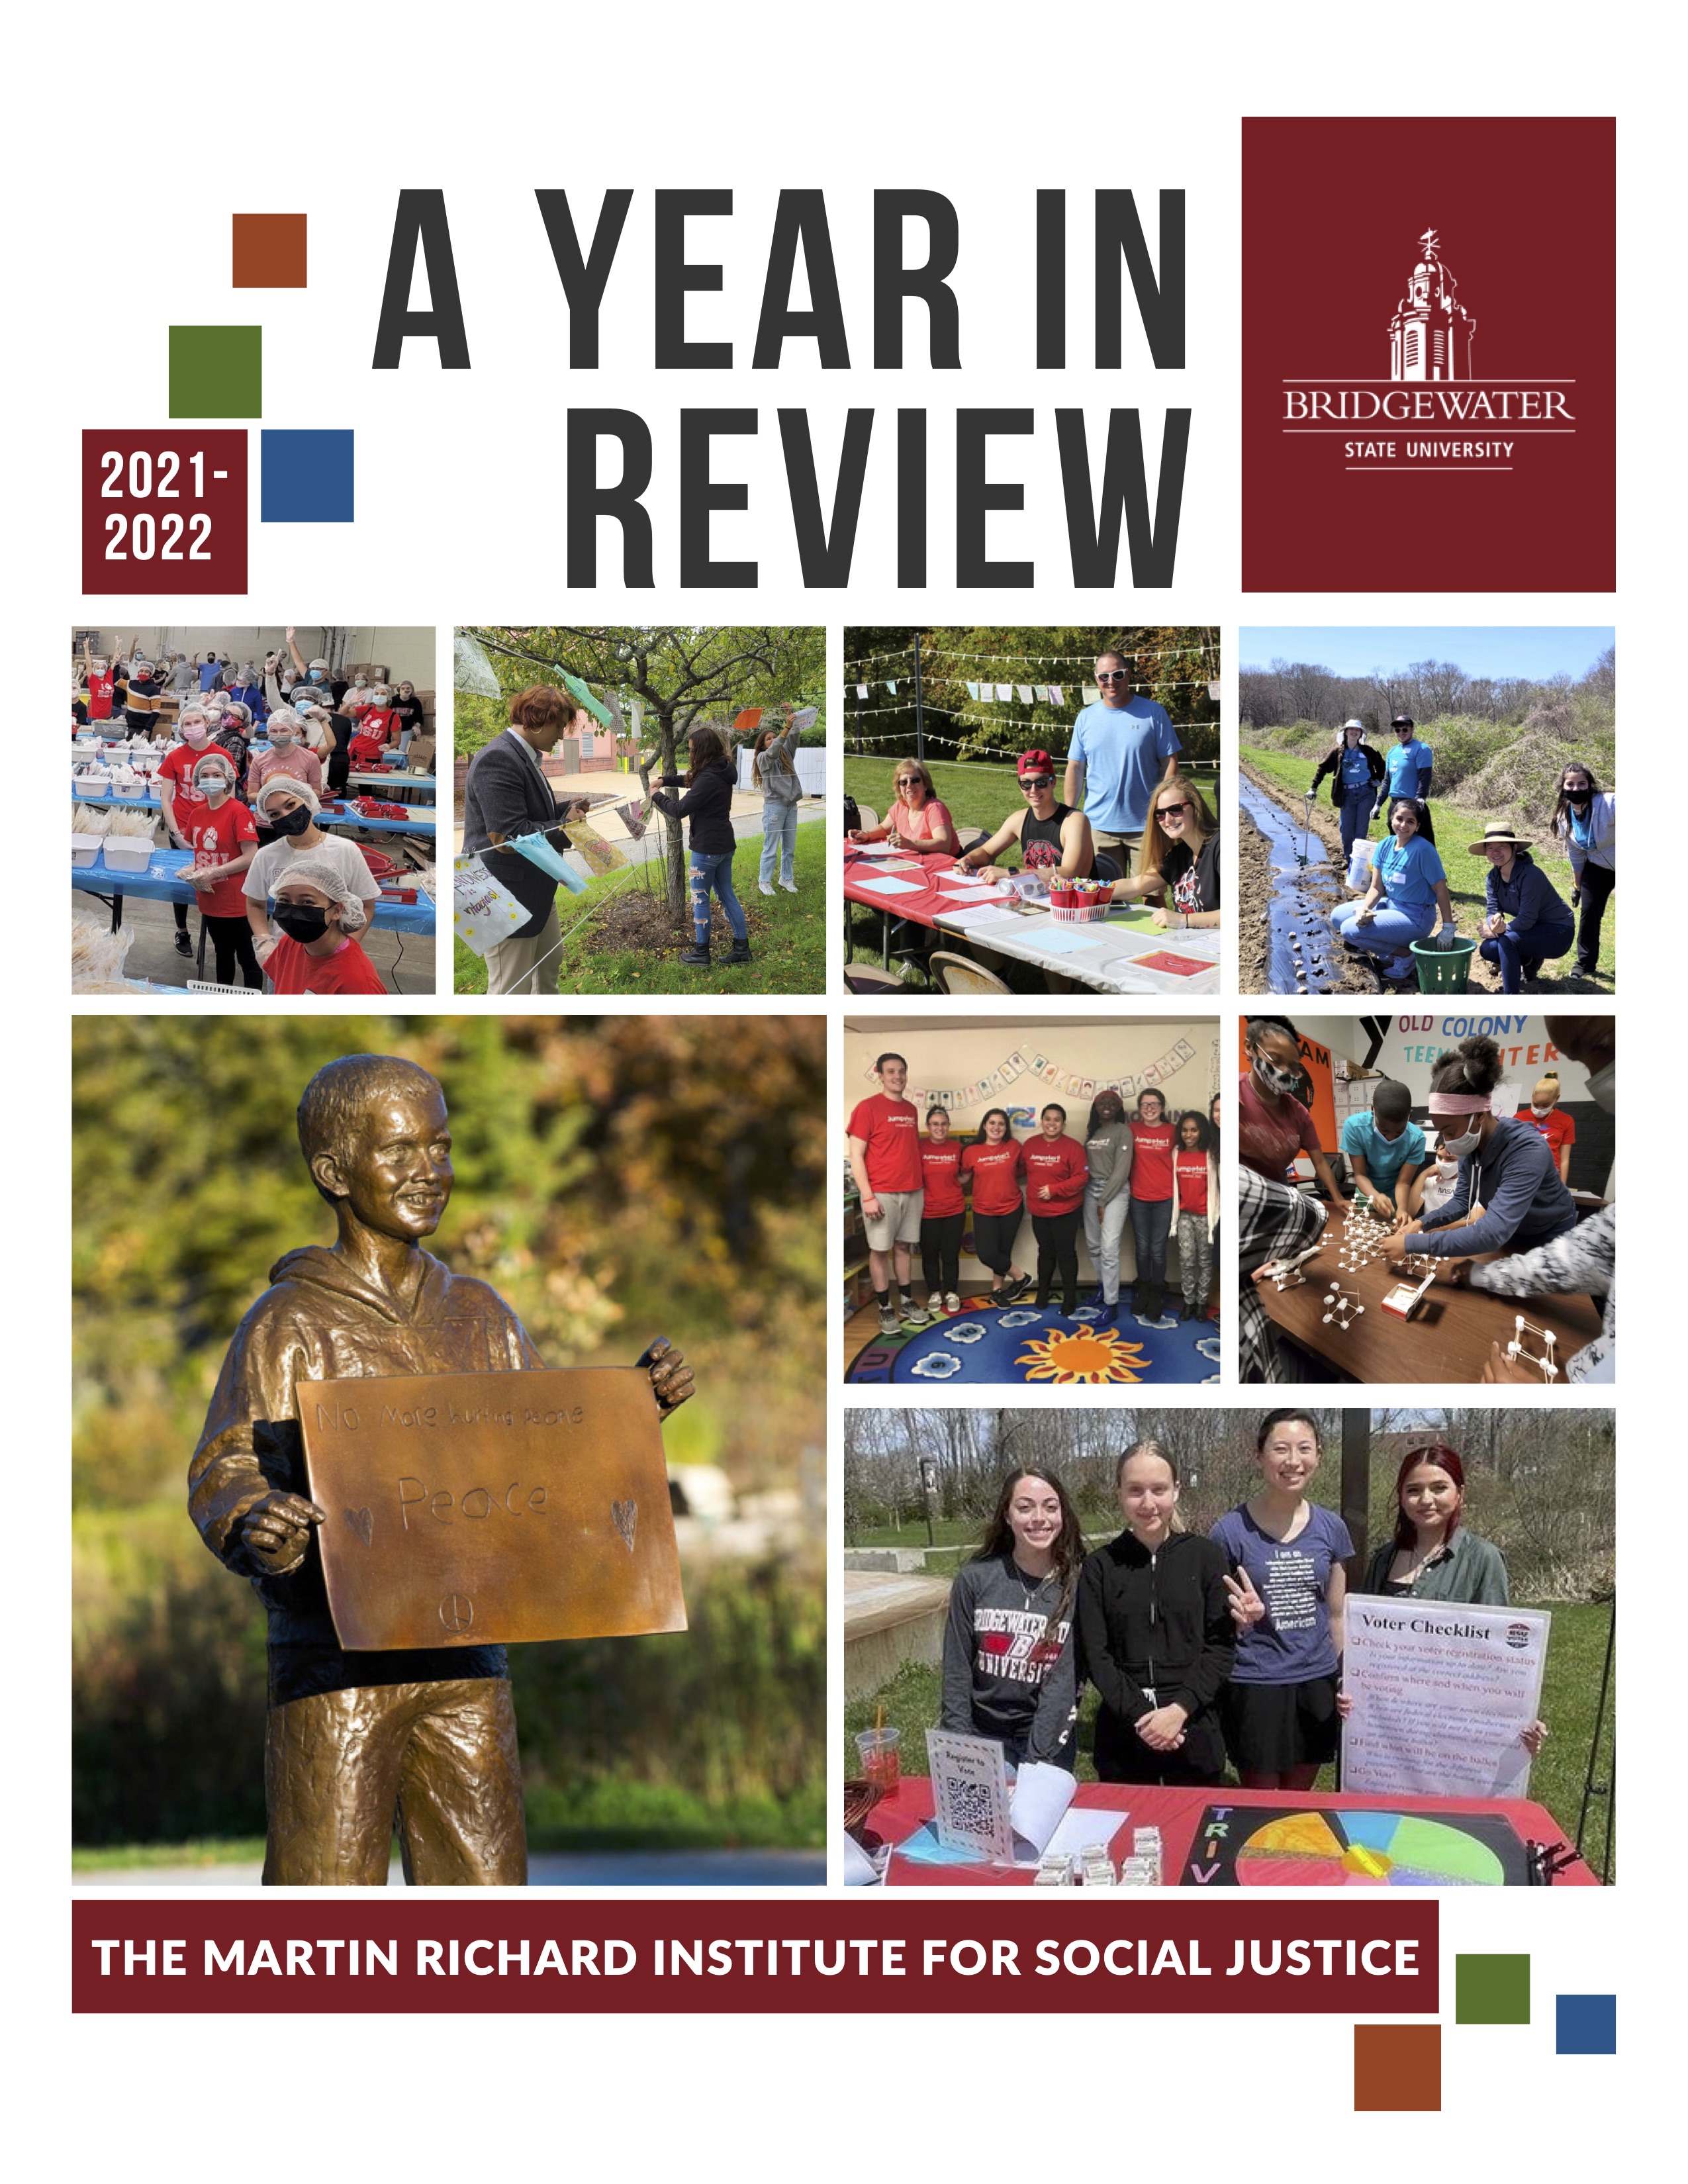 2021-2022 A Year in Review: Martin Richard Institute for Social Justice